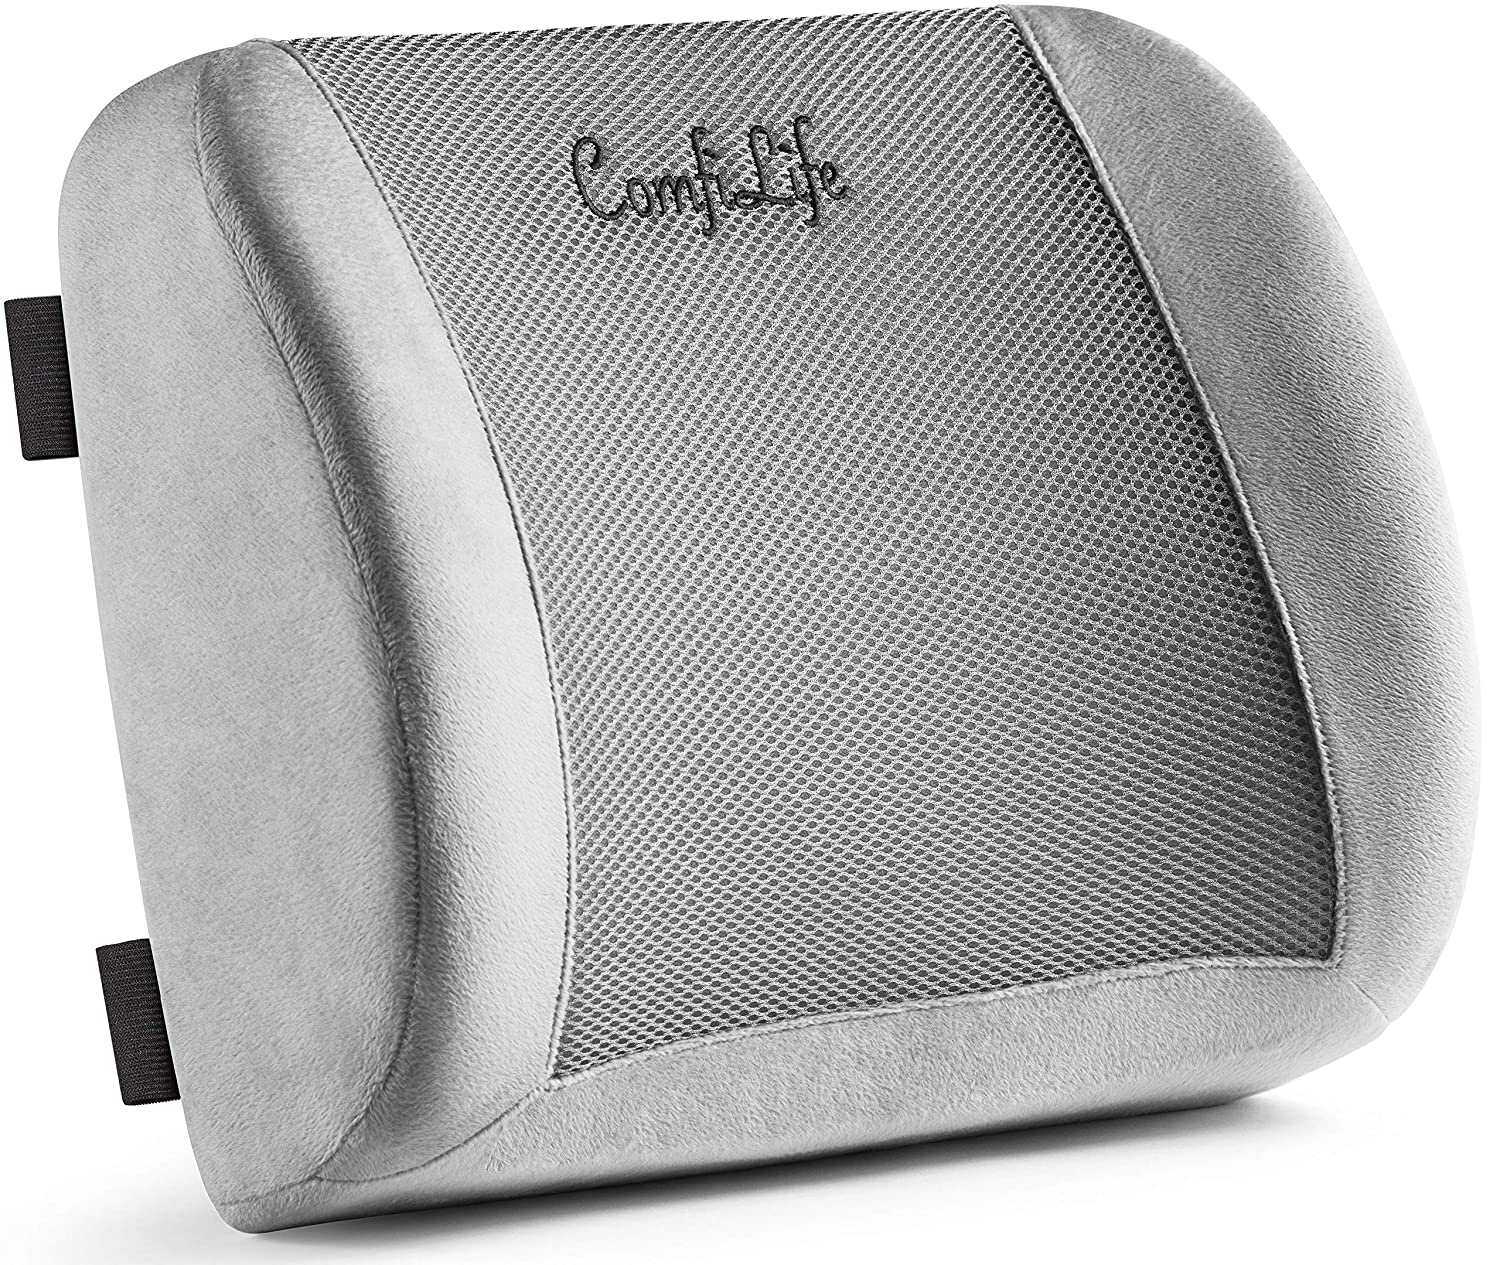 ComfiLife Lumbar Support Memory Foam Back Pillow with Adjustable Strap and Breathable 3D Mesh Office Chair and Car Seat Cushion - Hatke